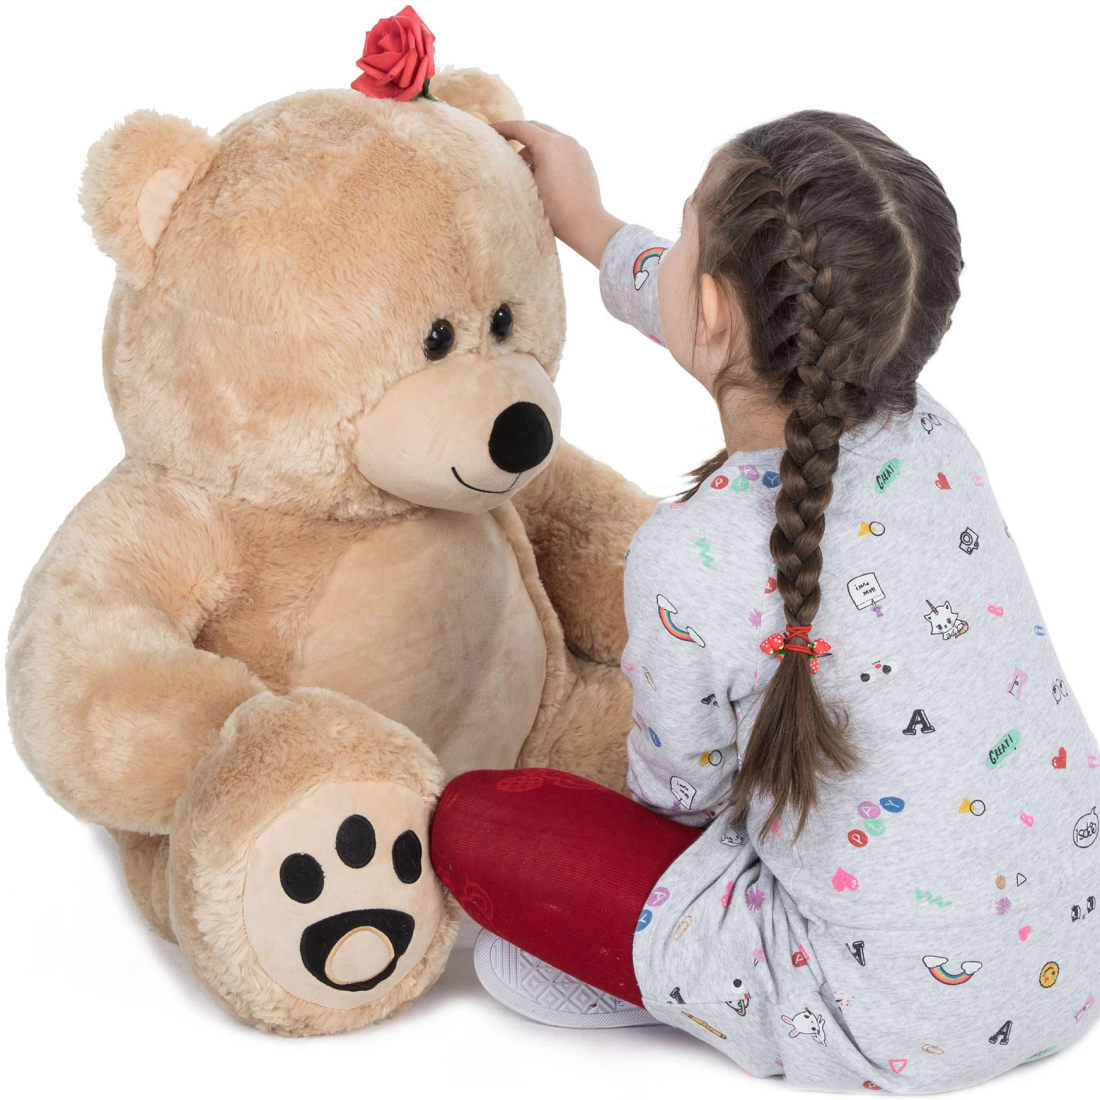 Romantic Teddy Bear Gifts for Special Occasions